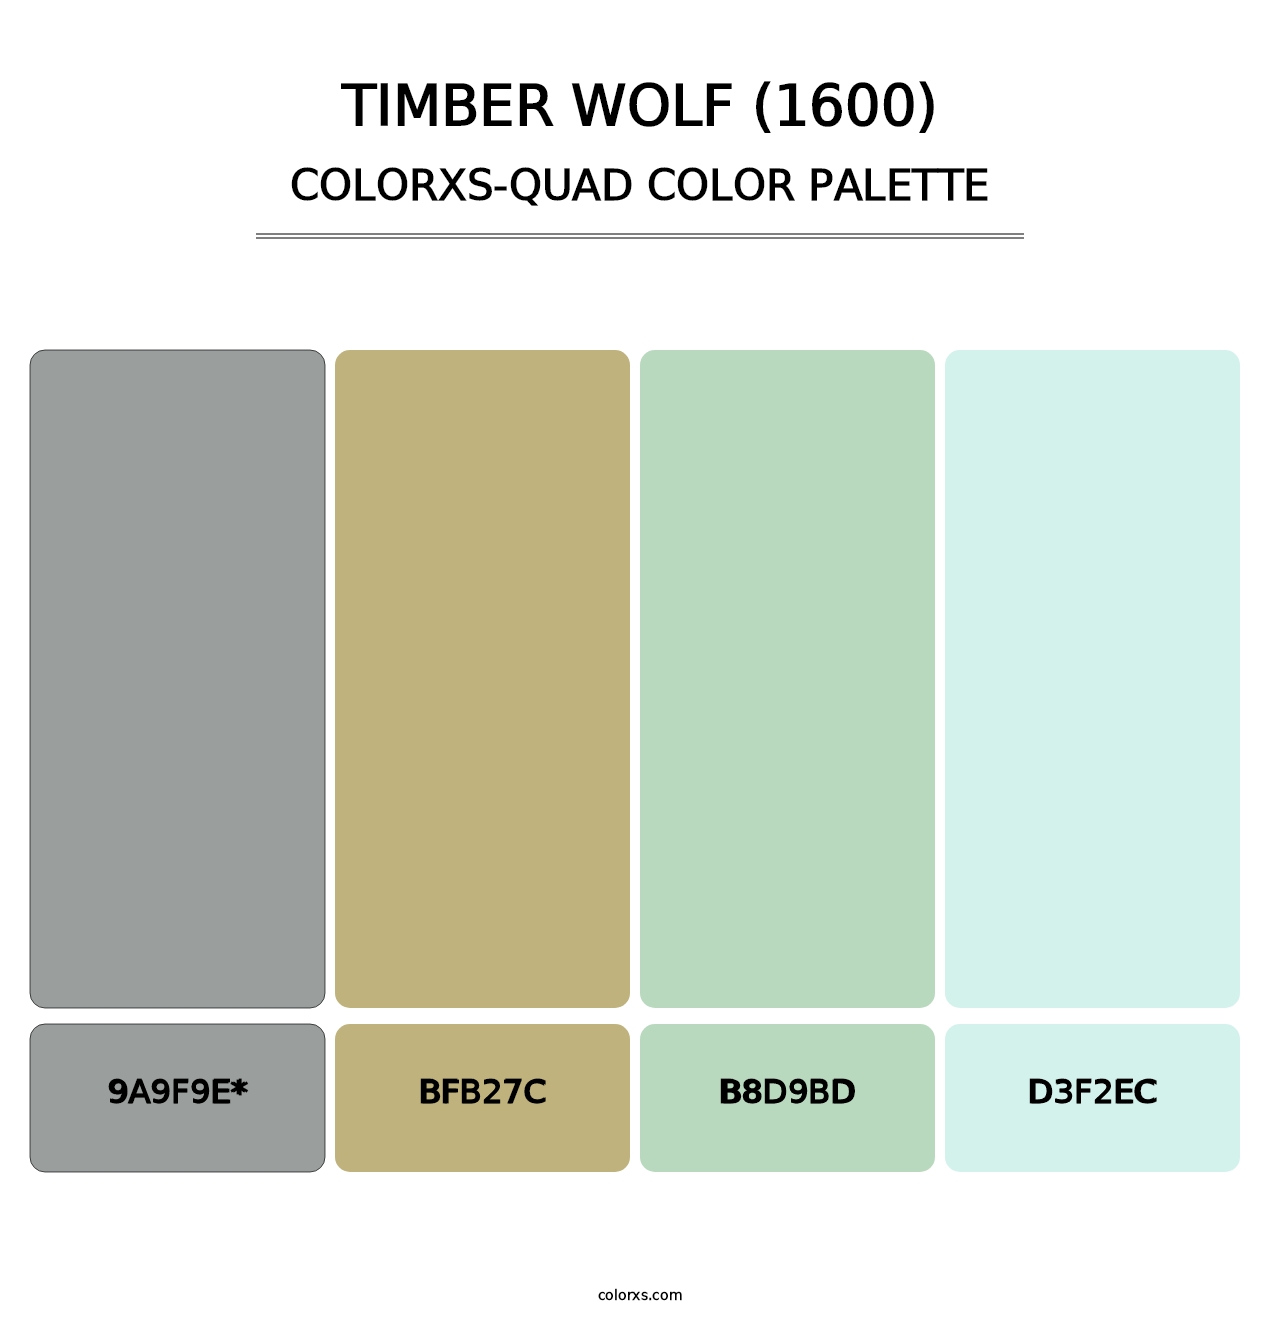 Timber Wolf (1600) - Colorxs Quad Palette